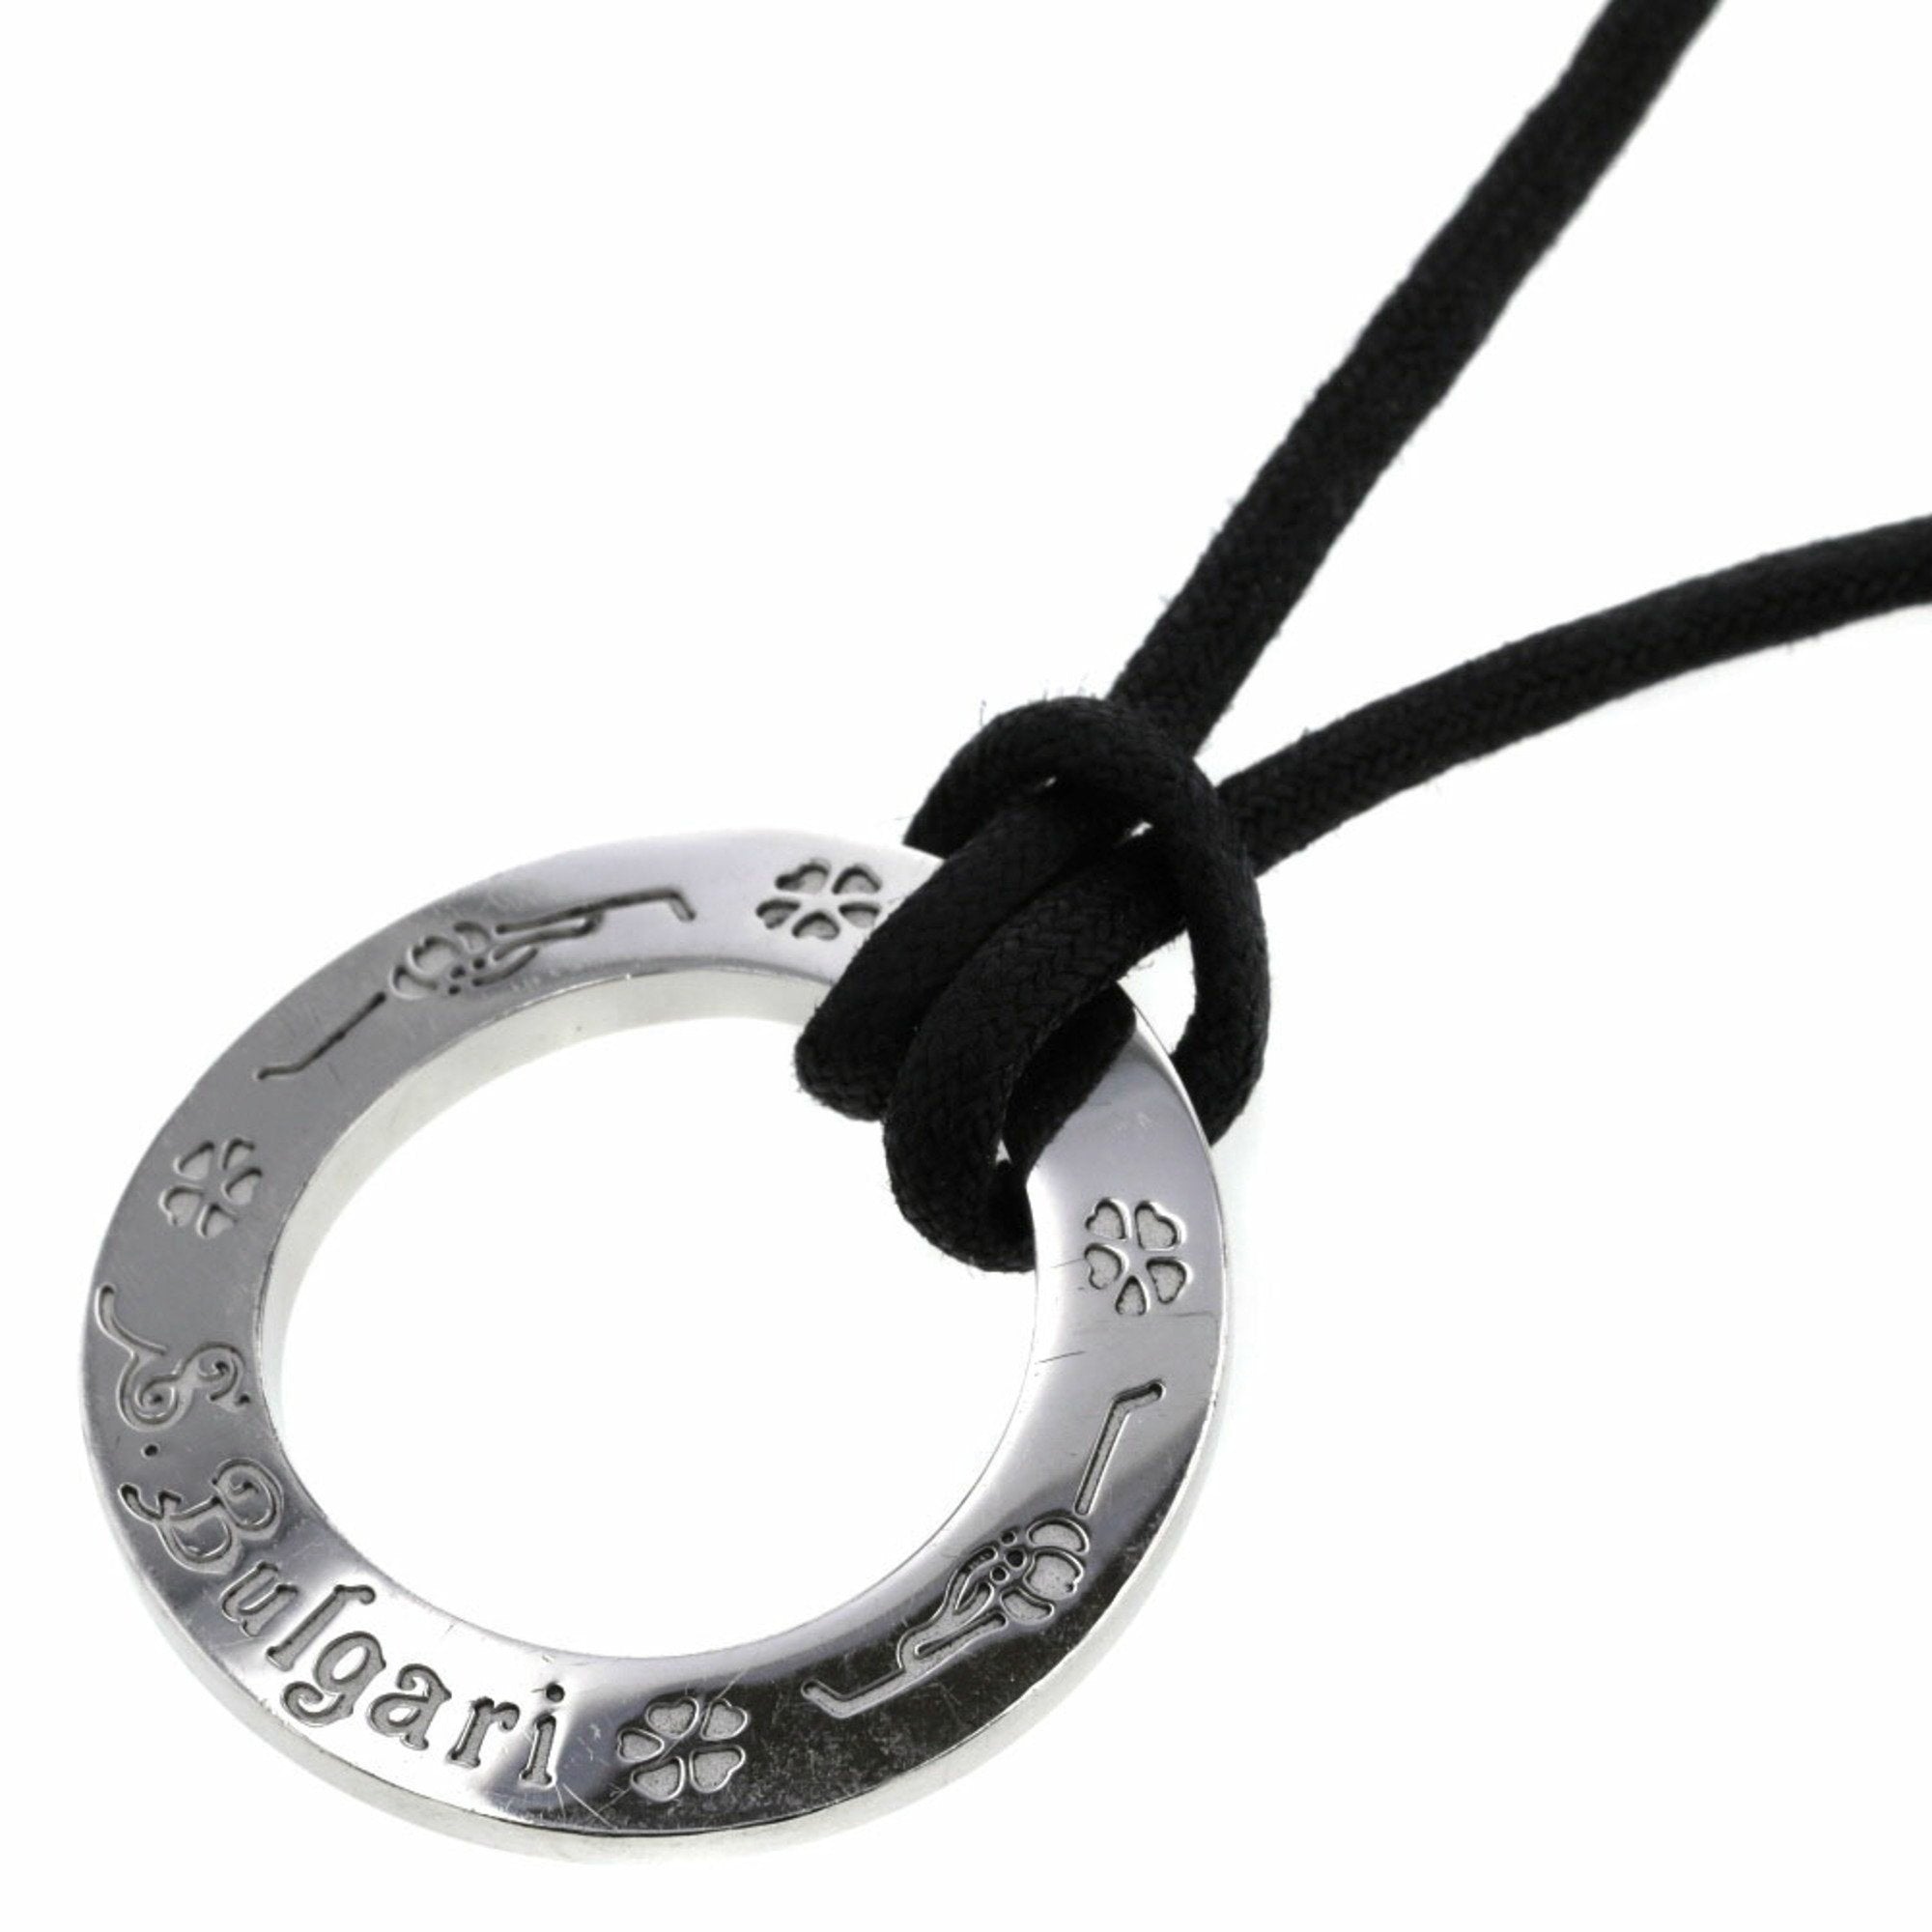 Bvlgari Necklace Save the Children Charity Choker Silver 925 Ladies BV